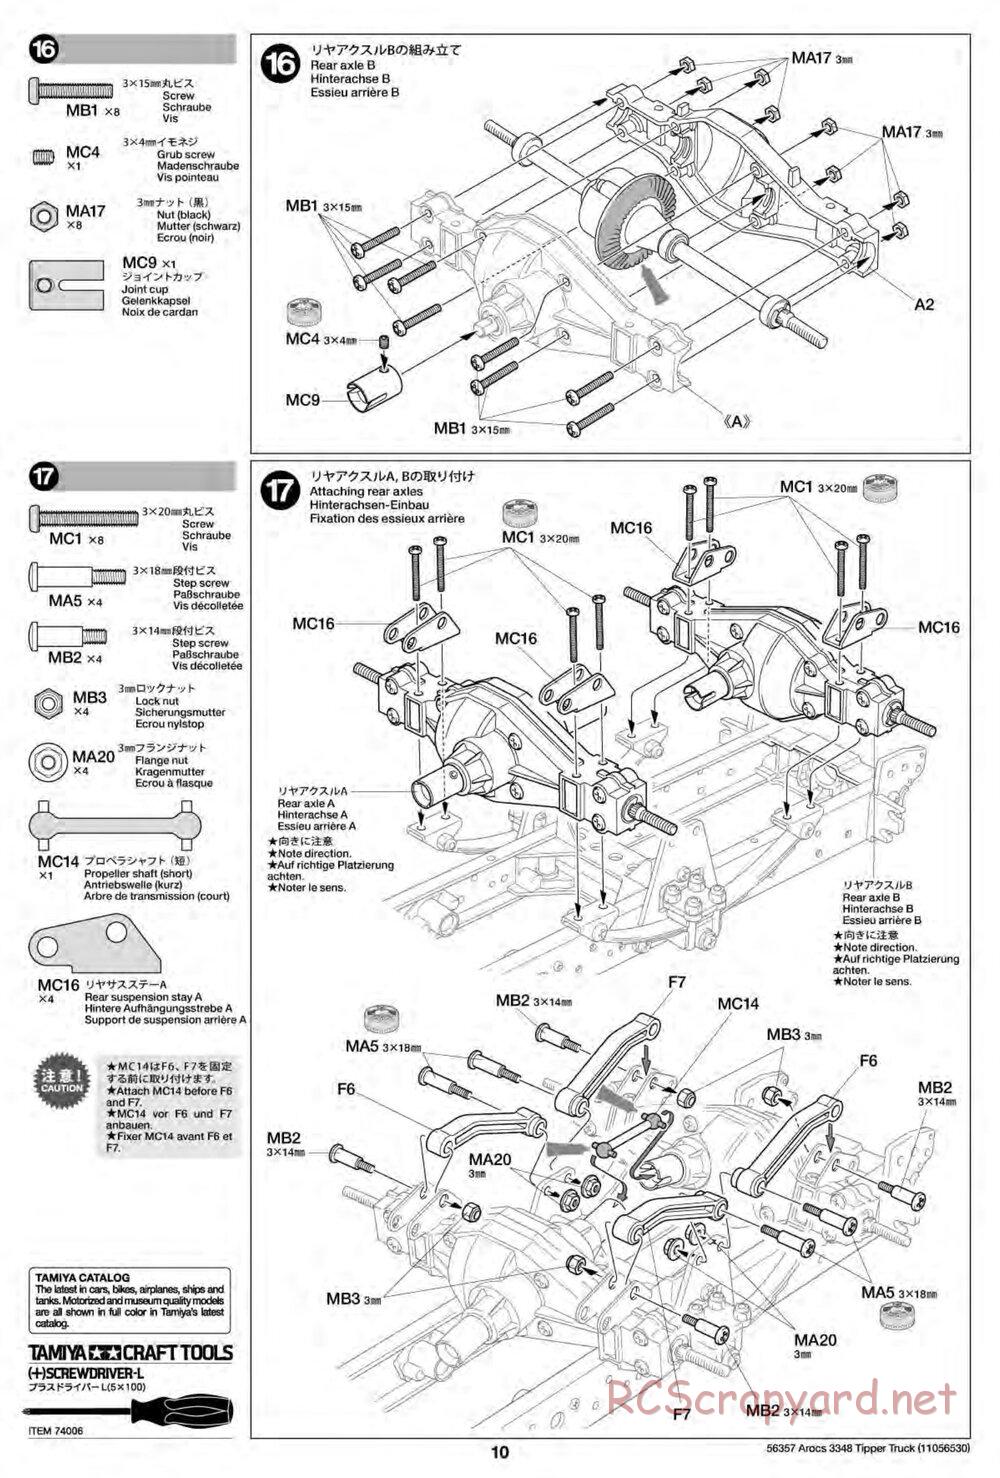 Tamiya - Mercedes-Benz Arocs 3348 6x4 Tipper Truck Chassis - Manual - Page 10